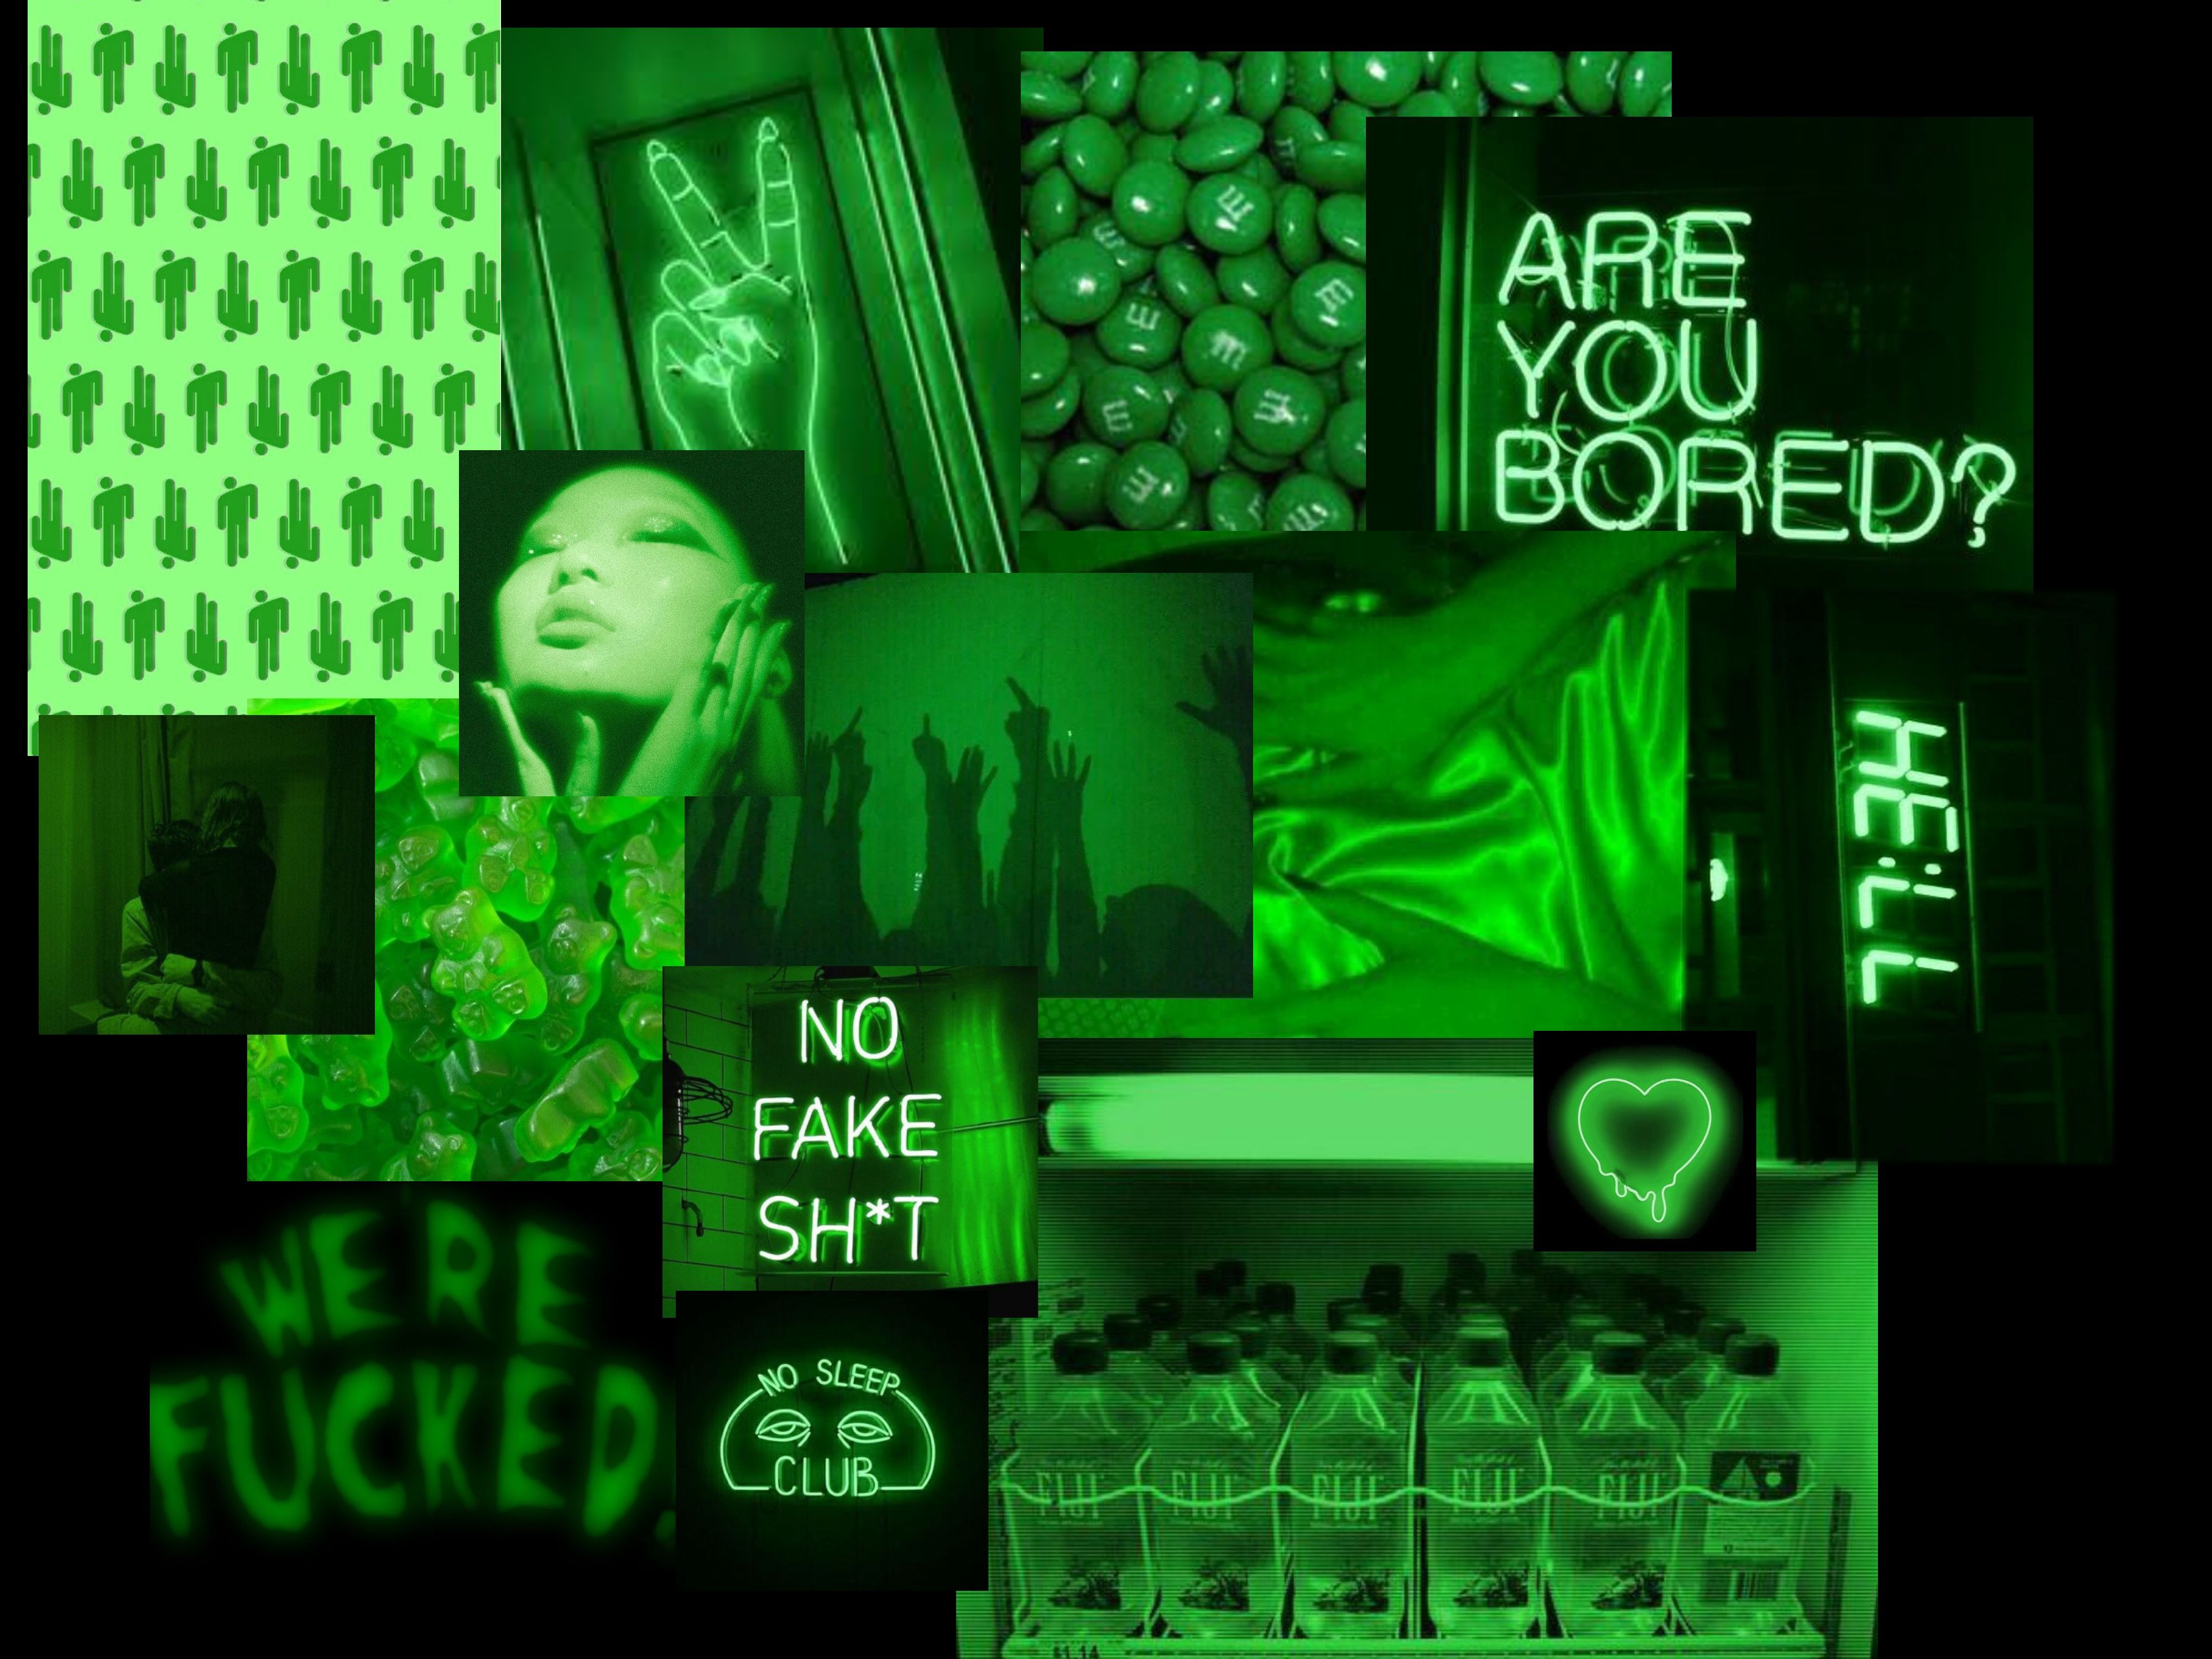 A collage of images with green text - Neon green, lime green